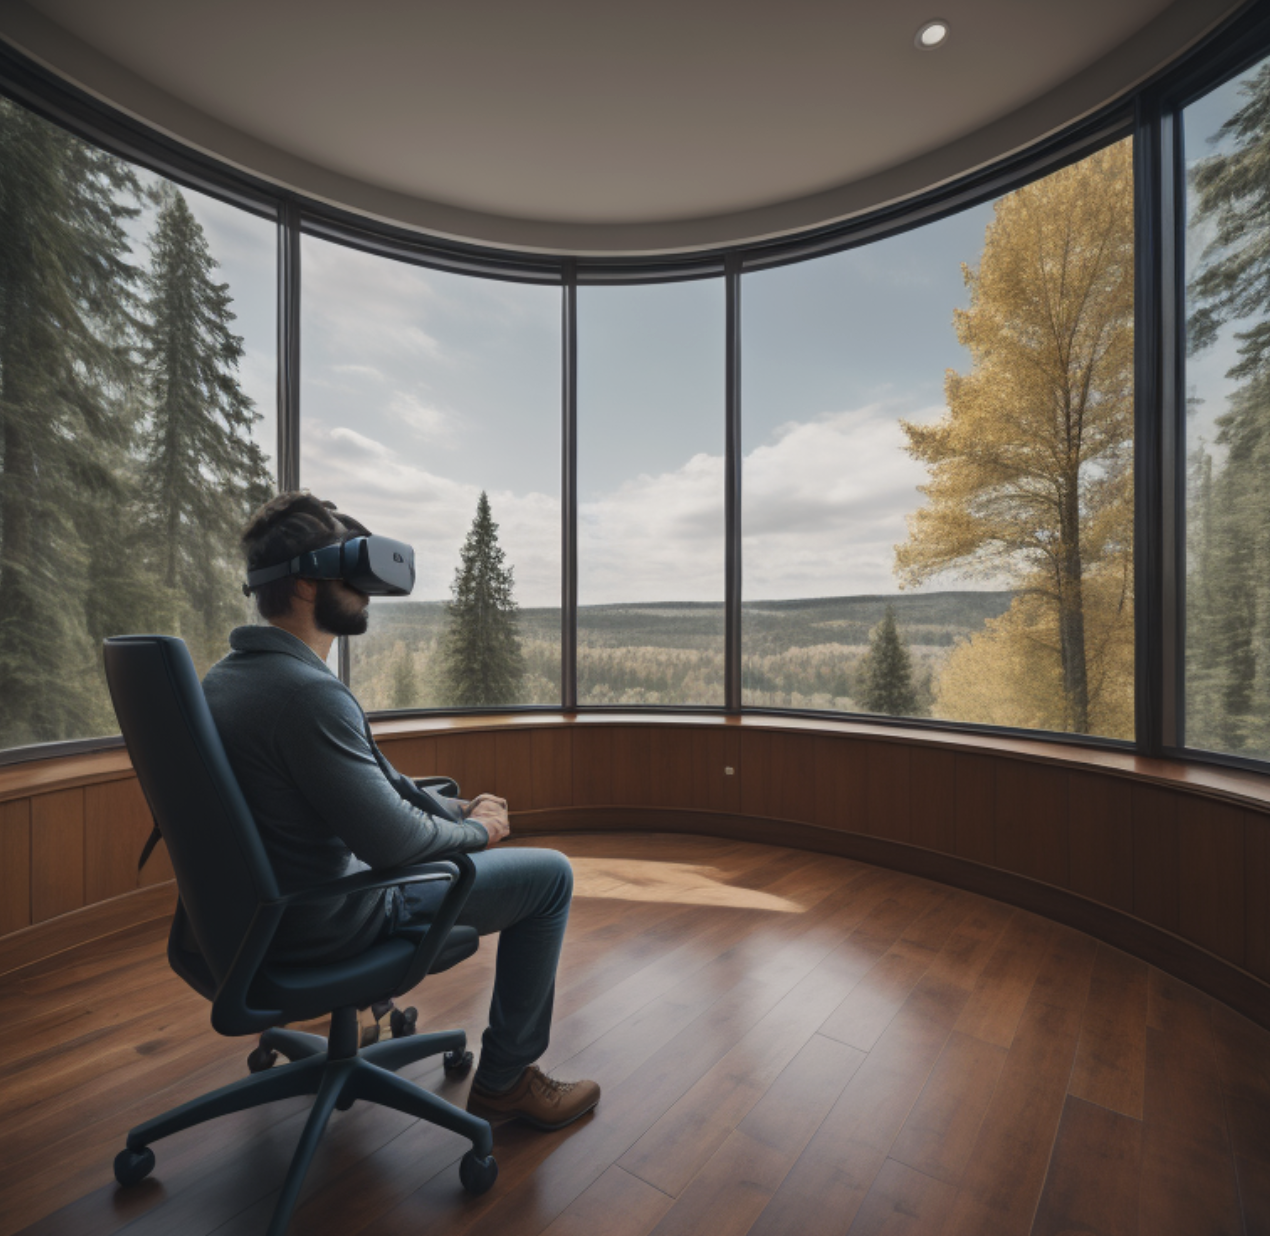 Man sitting in a chair with a VR headset on, in front of a large window with trees outside